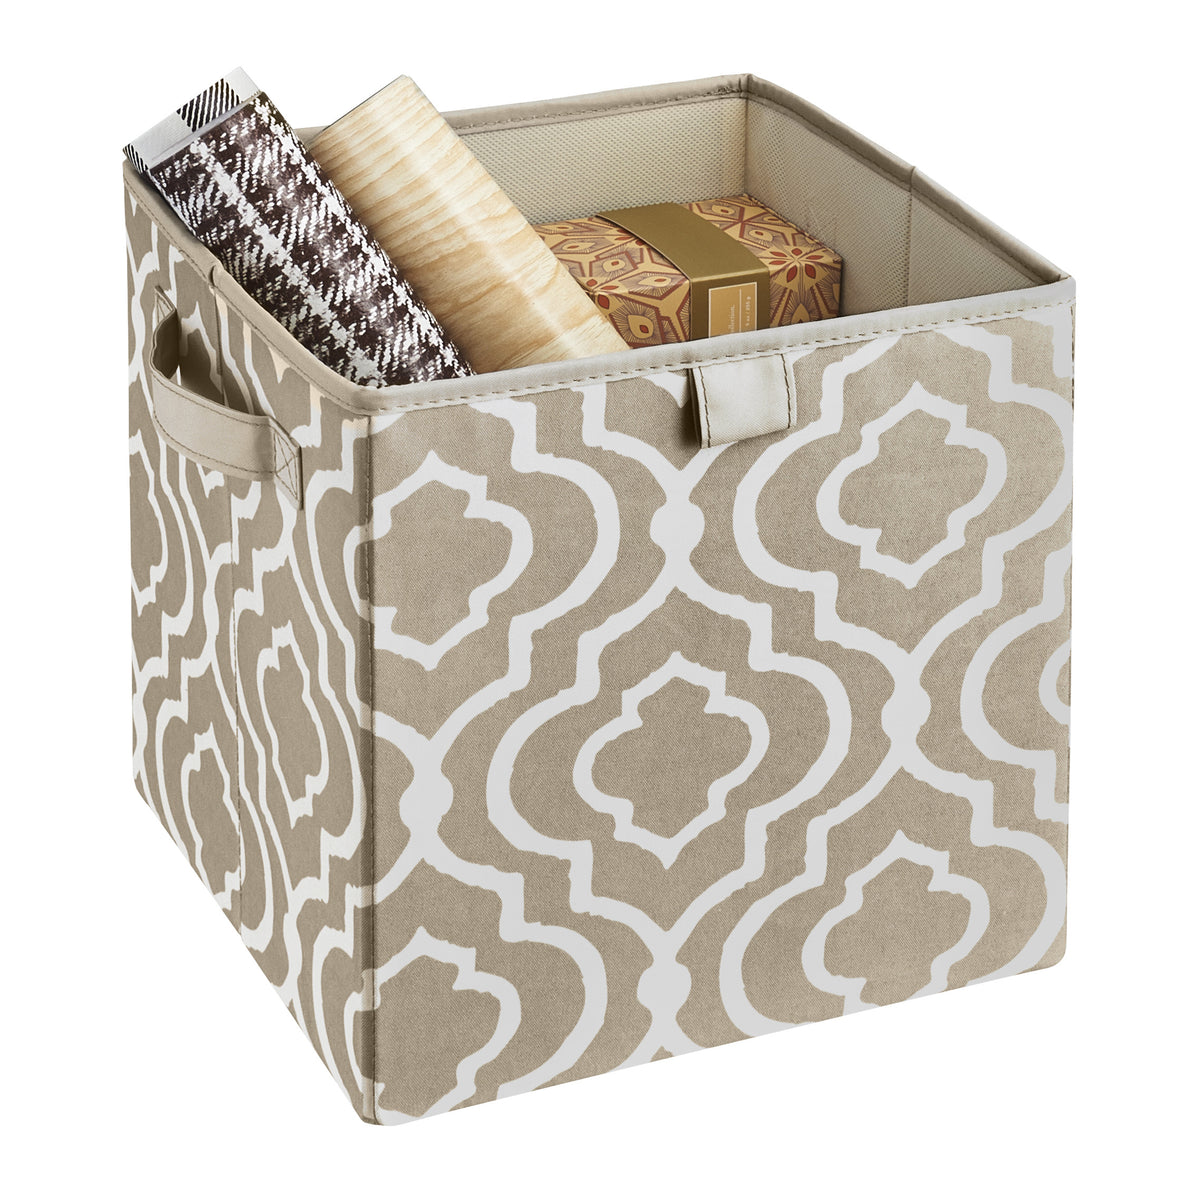 buy drawer organizer at cheap rate in bulk. wholesale & retail small & large storage baskets store.